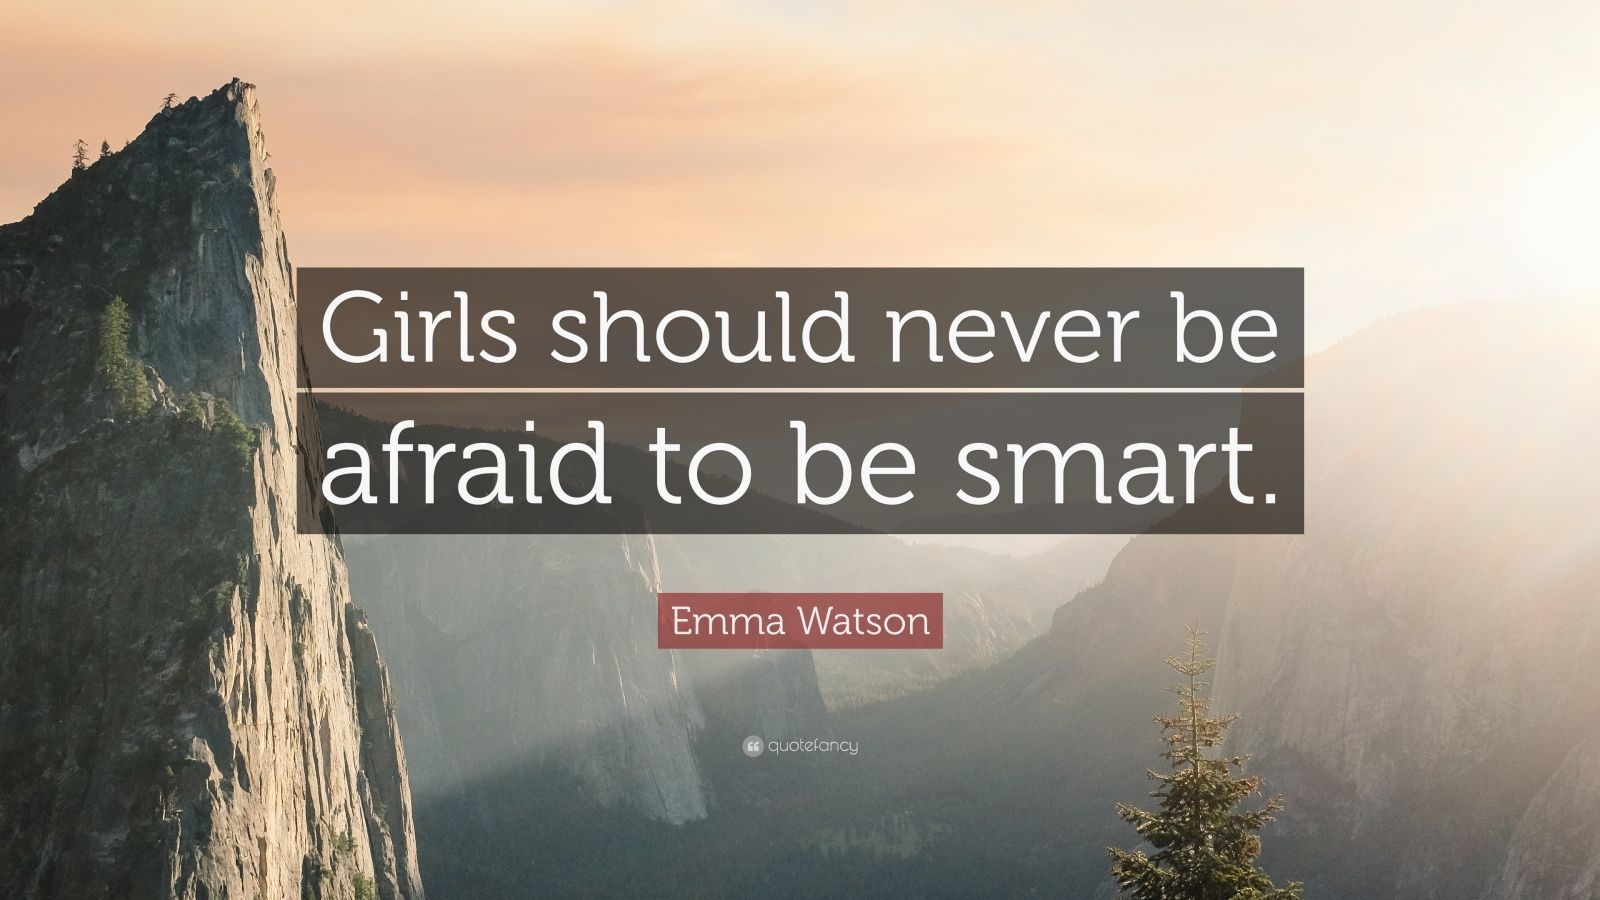 Emma Watson Quote: “Girls should never be afraid to be smart.” (12 wallpaper)